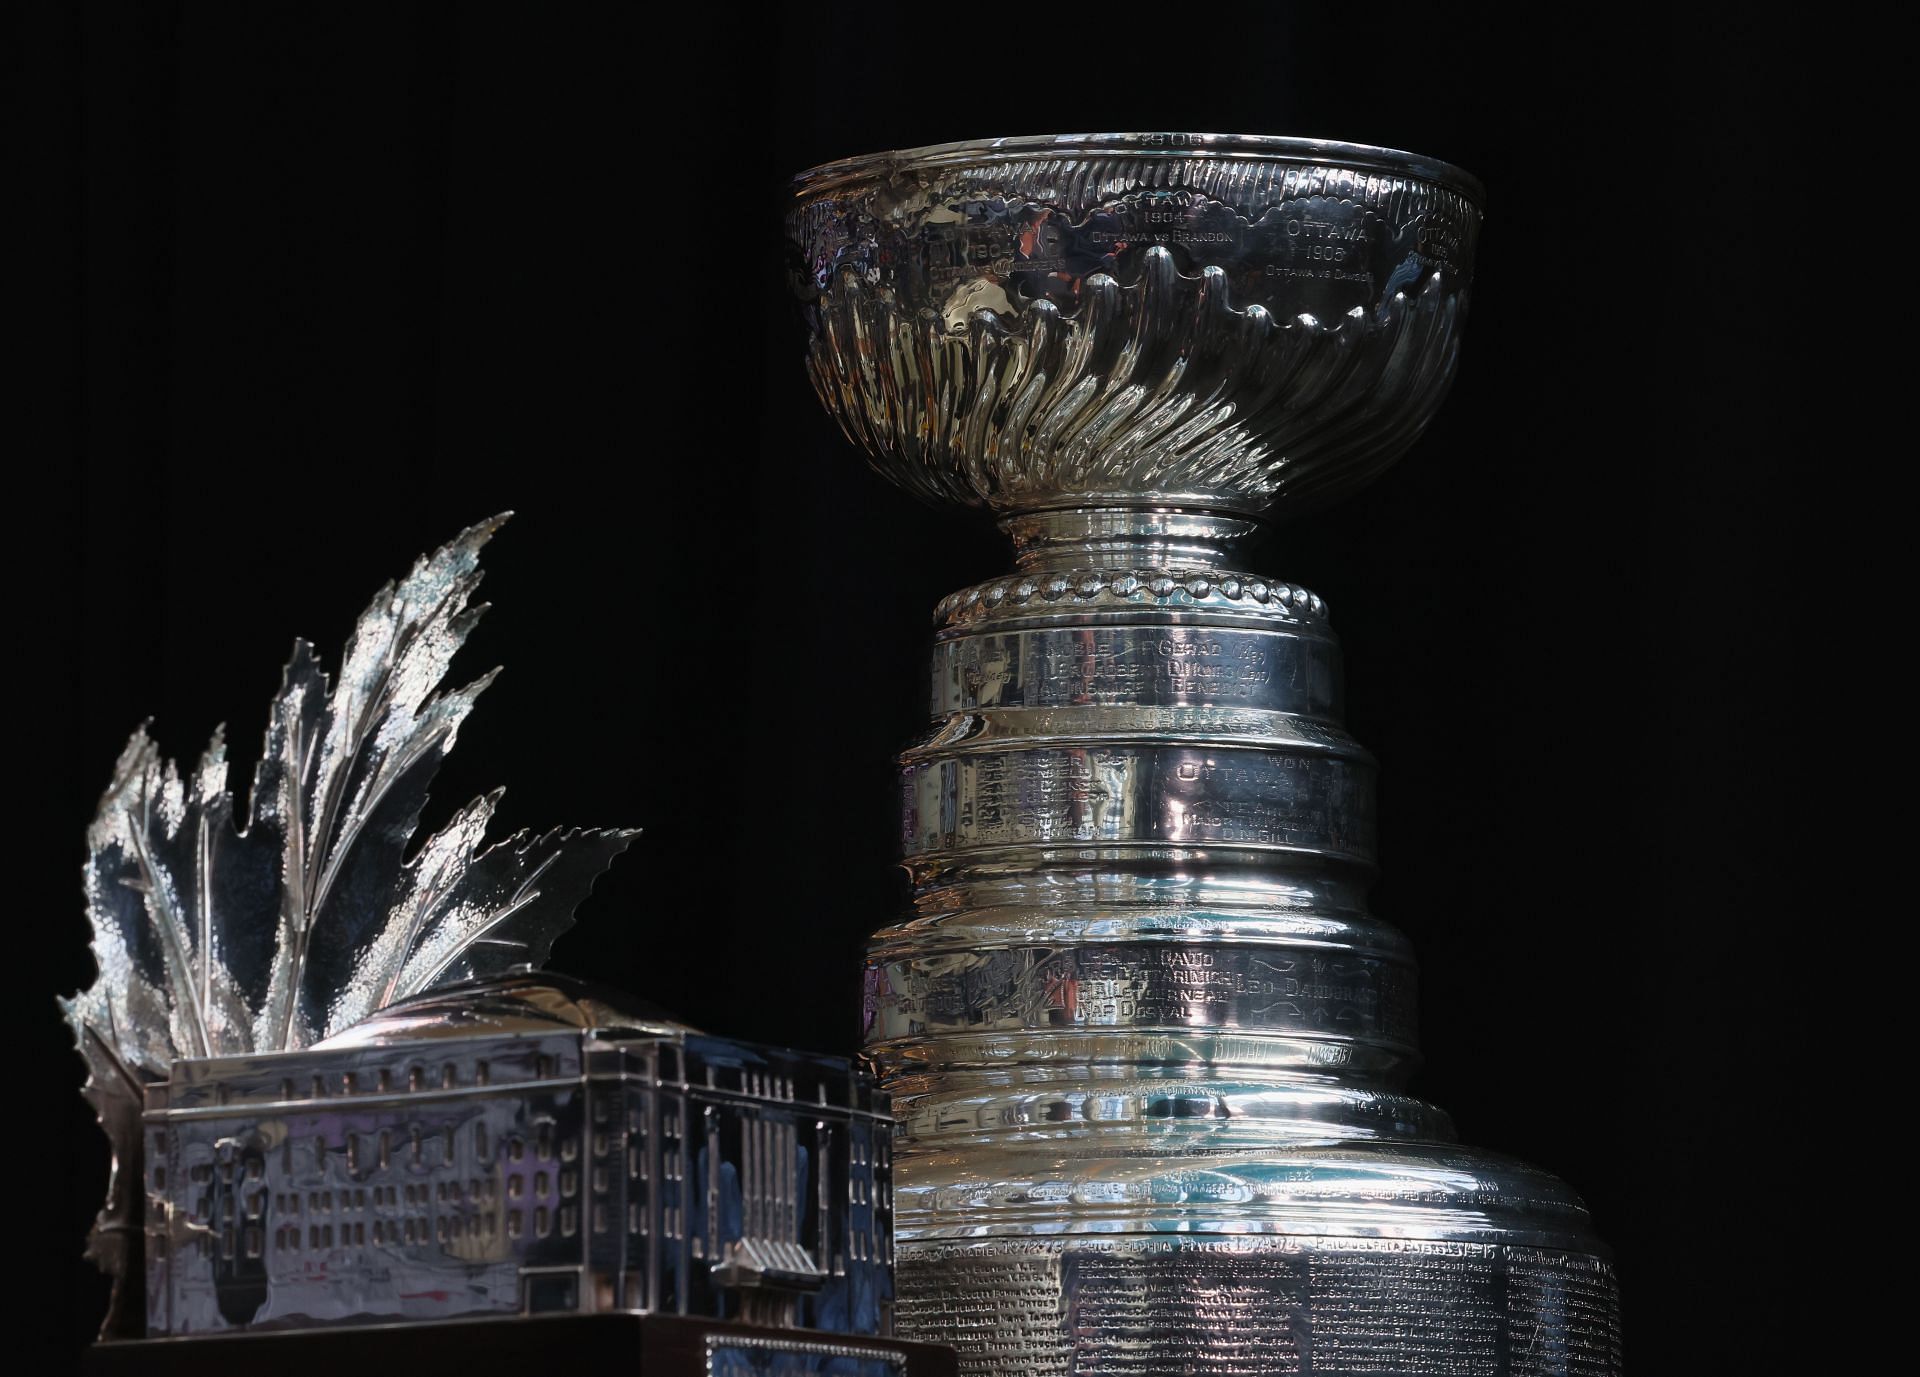 The Stanley Cup: the most coveted trophy in sports.